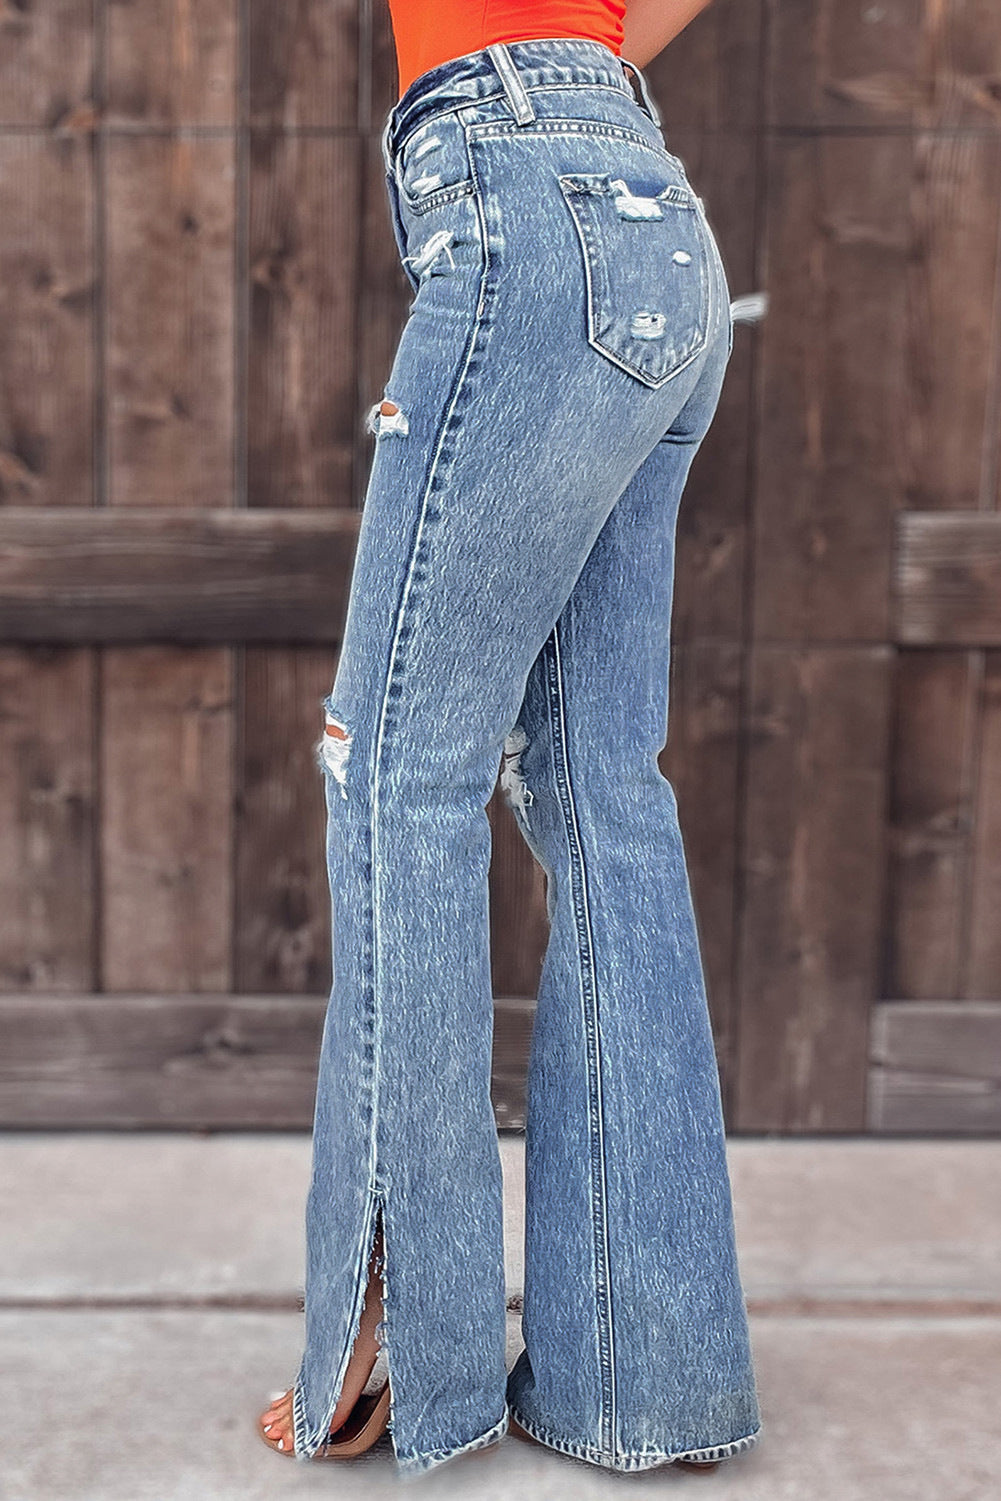 Women's washed ripped flared jeans